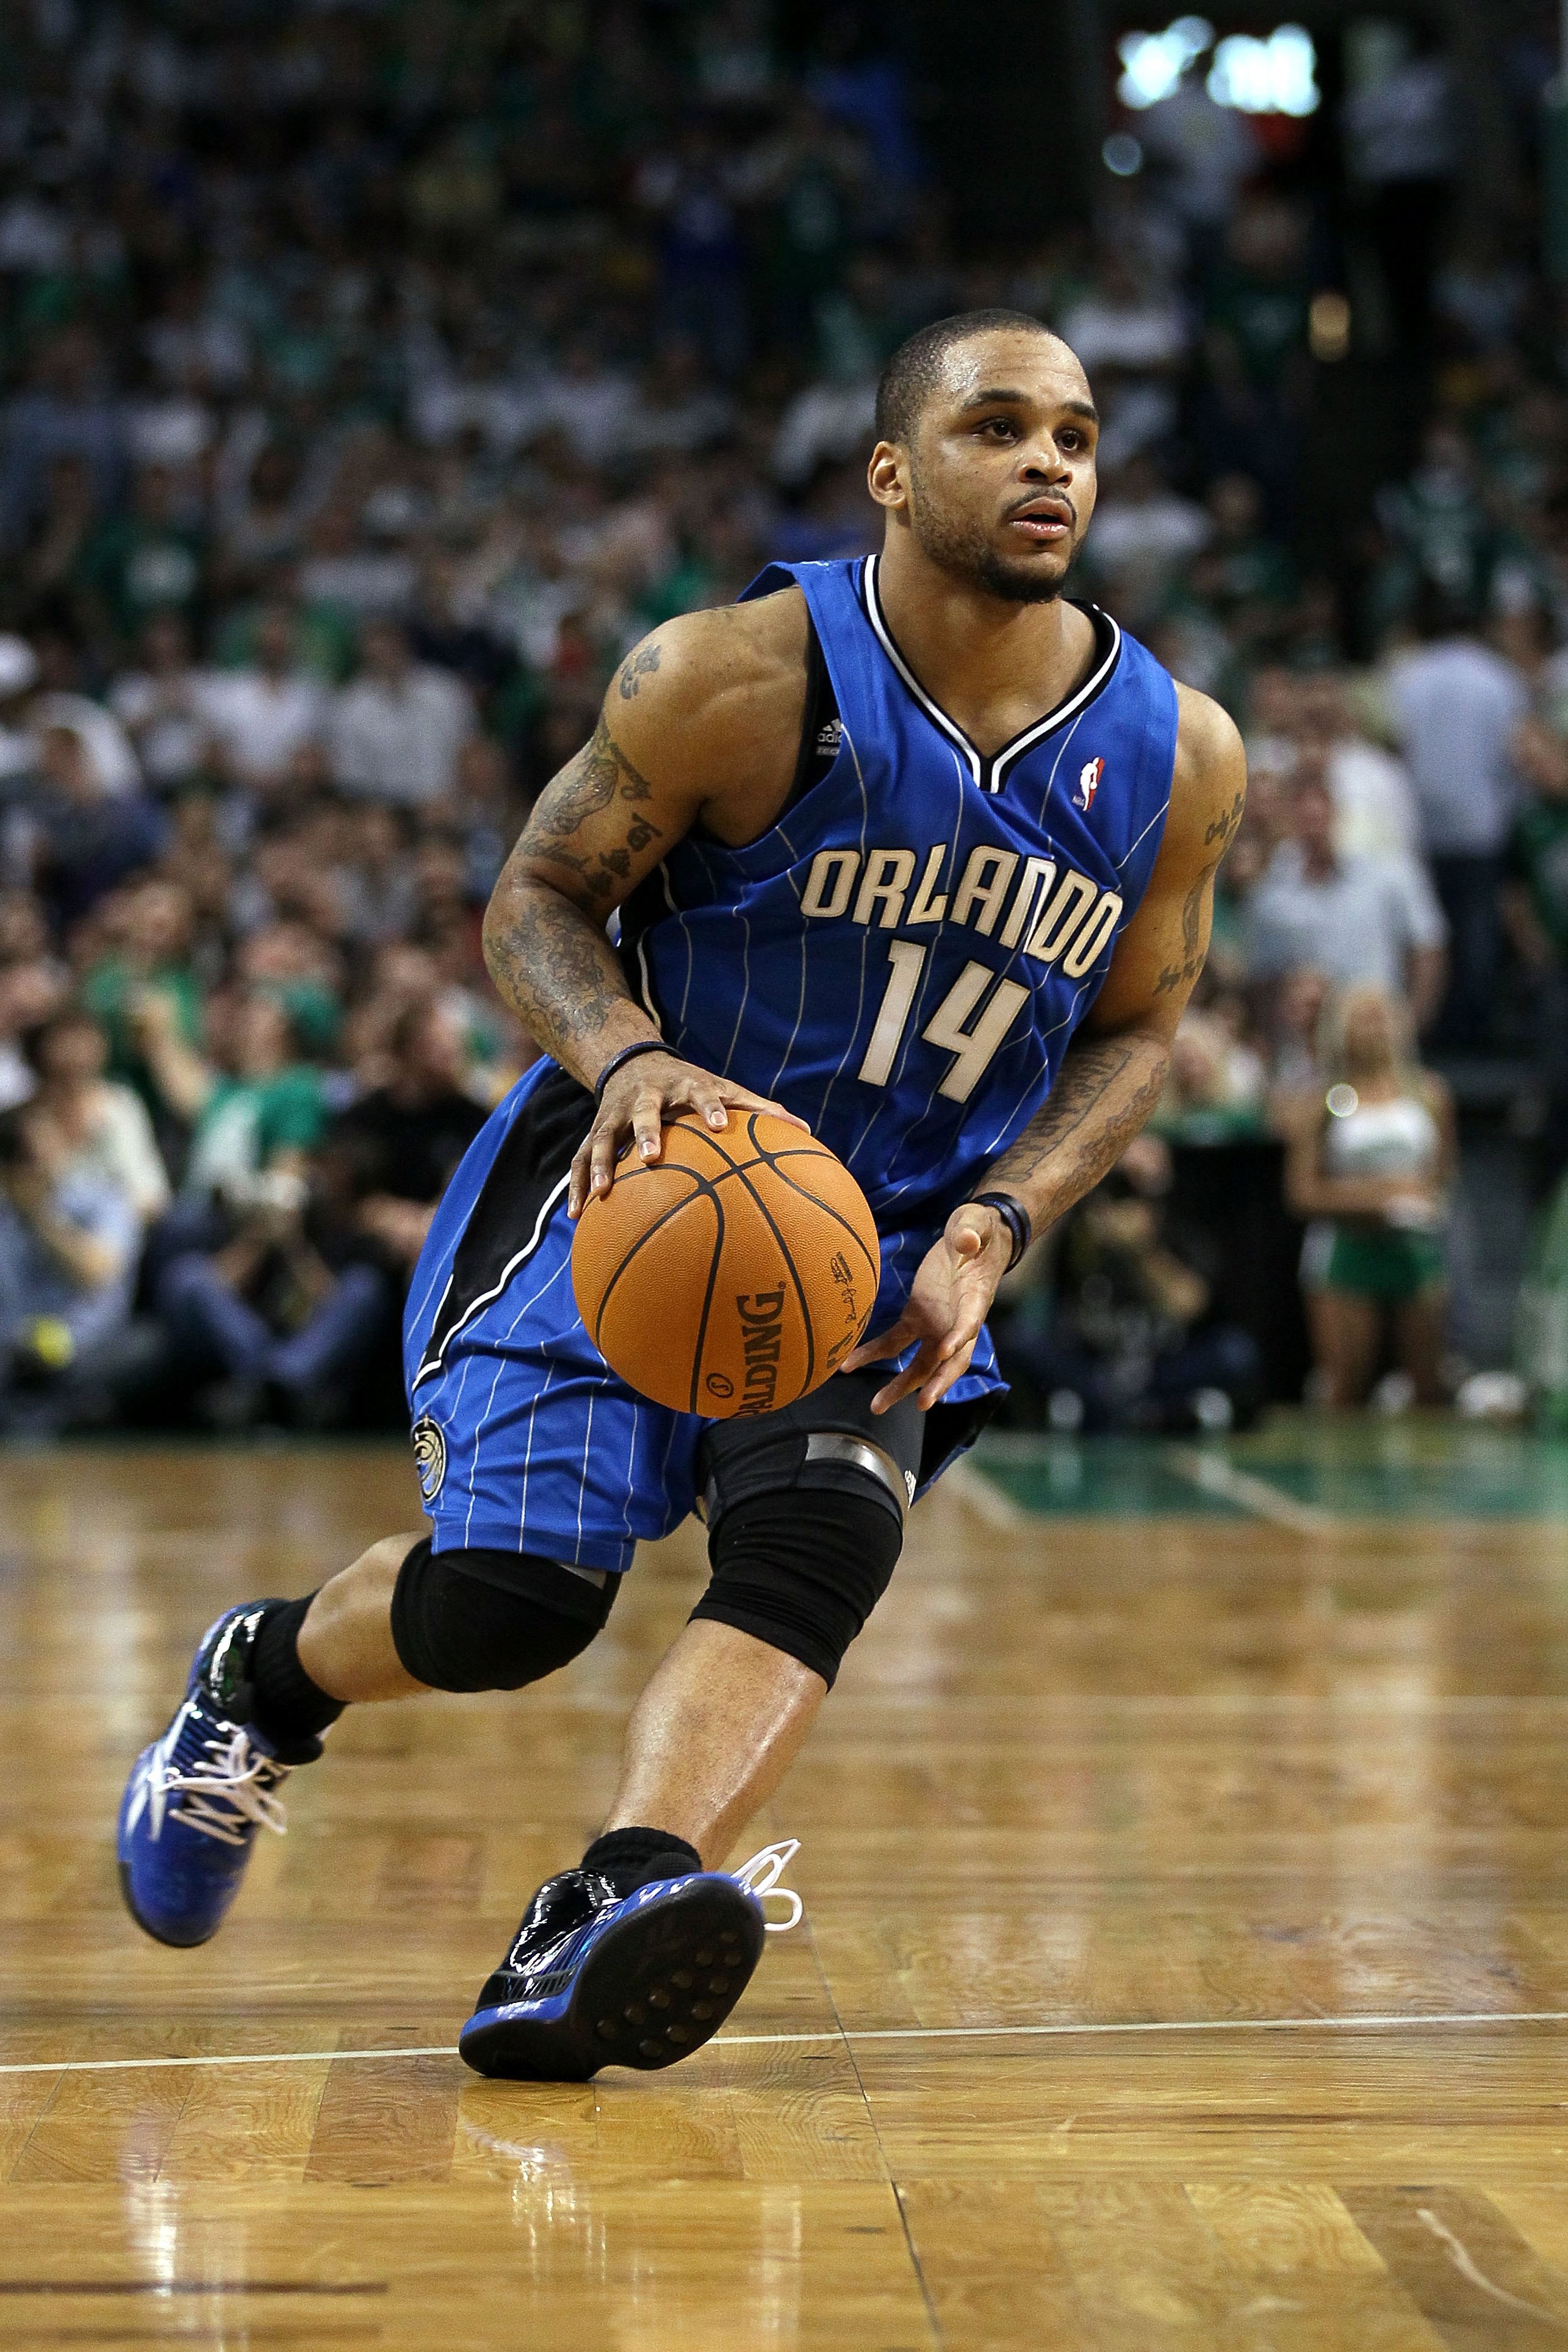 BOSTON - MAY 28:  Jameer Nelson #14 of the Orlando Magic drives against the Boston Celtics in Game Six of the Eastern Conference Finals during the 2010 NBA Playoffs at TD Garden on May 28, 2010 in Boston, Massachusetts.  NOTE TO USER: User expressly ackno